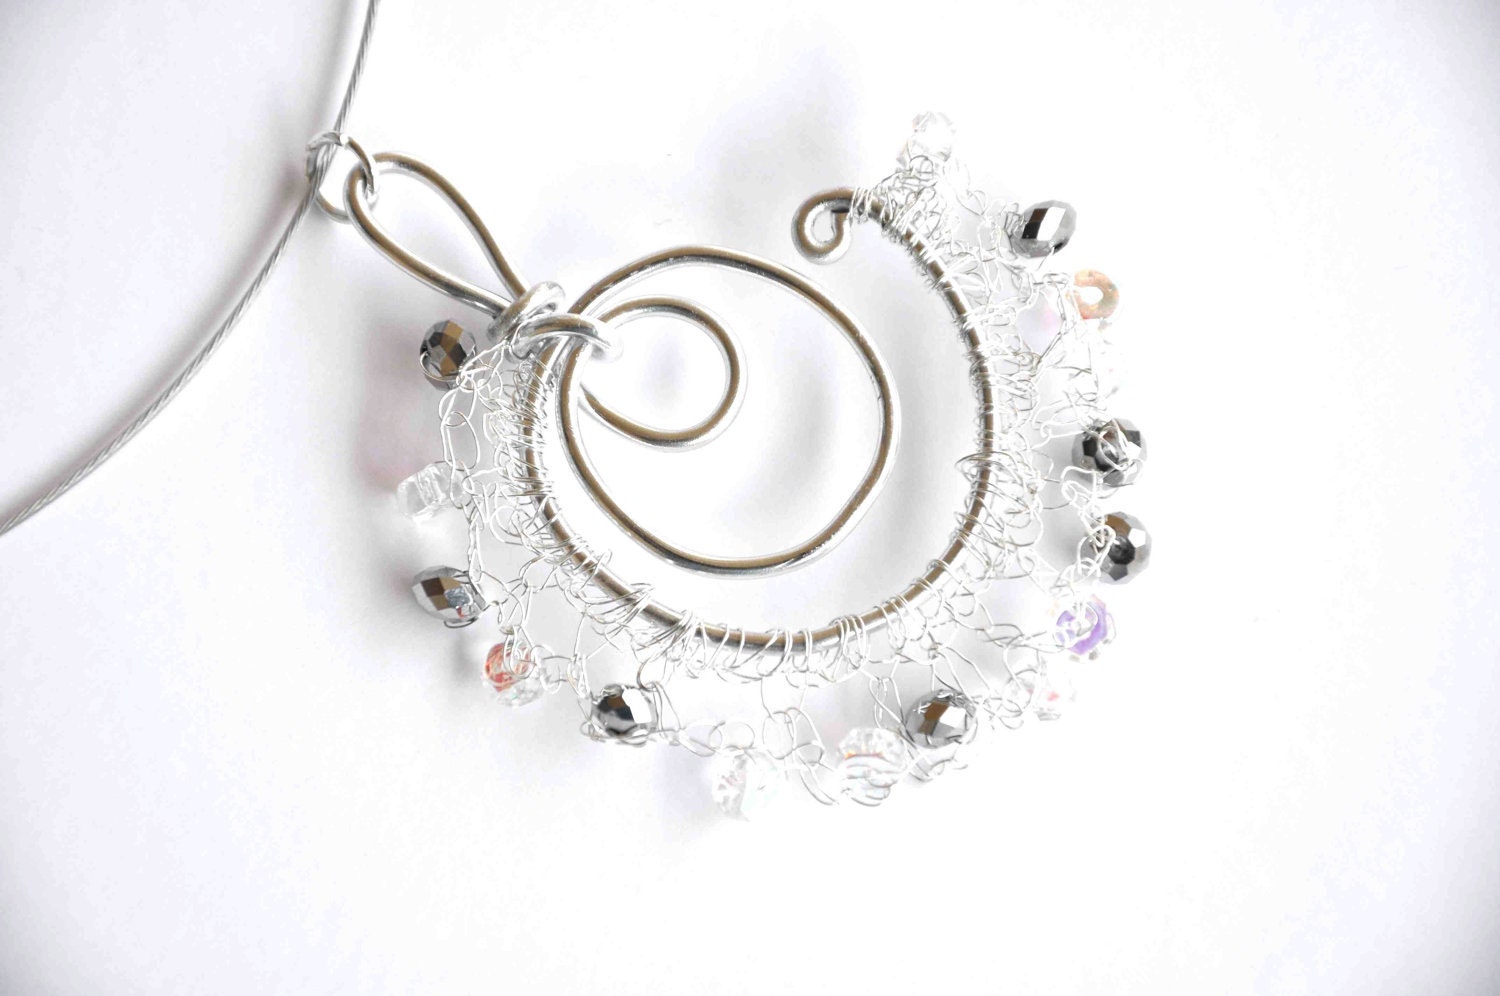 GALASSIA - Galaxy Crochet Wire Wrapped Czech Crystal Silver Aluminum Silver Wire Fashion Necklace